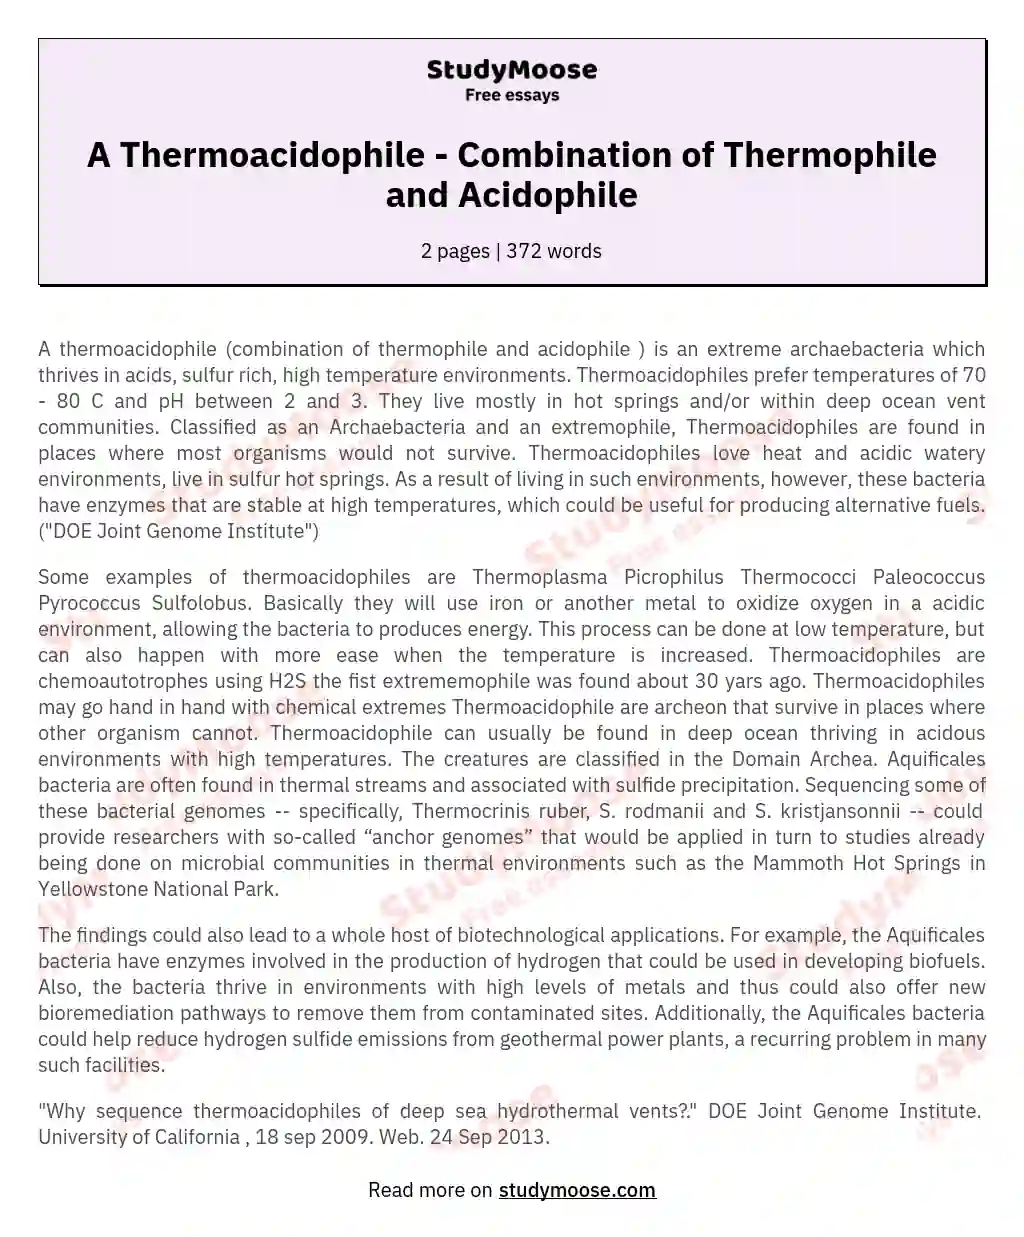 A Thermoacidophile - Combination of Thermophile and Acidophile essay